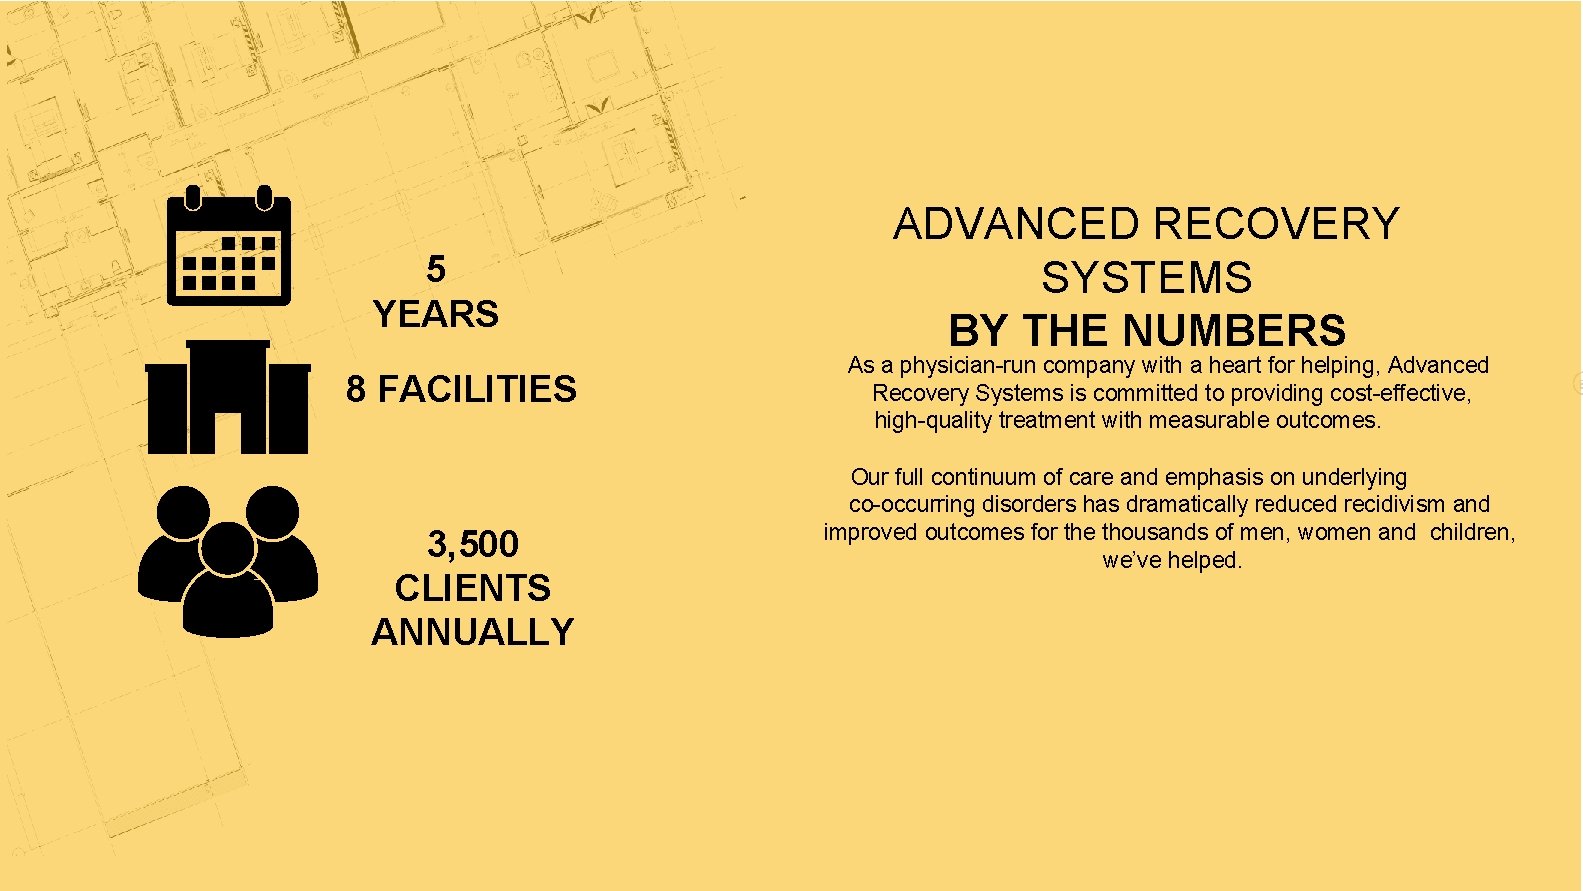 5 YEARS 8 FACILITIES 3, 500 CLIENTS ANNUALLY ADVANCED RECOVERY SYSTEMS BY THE NUMBERS